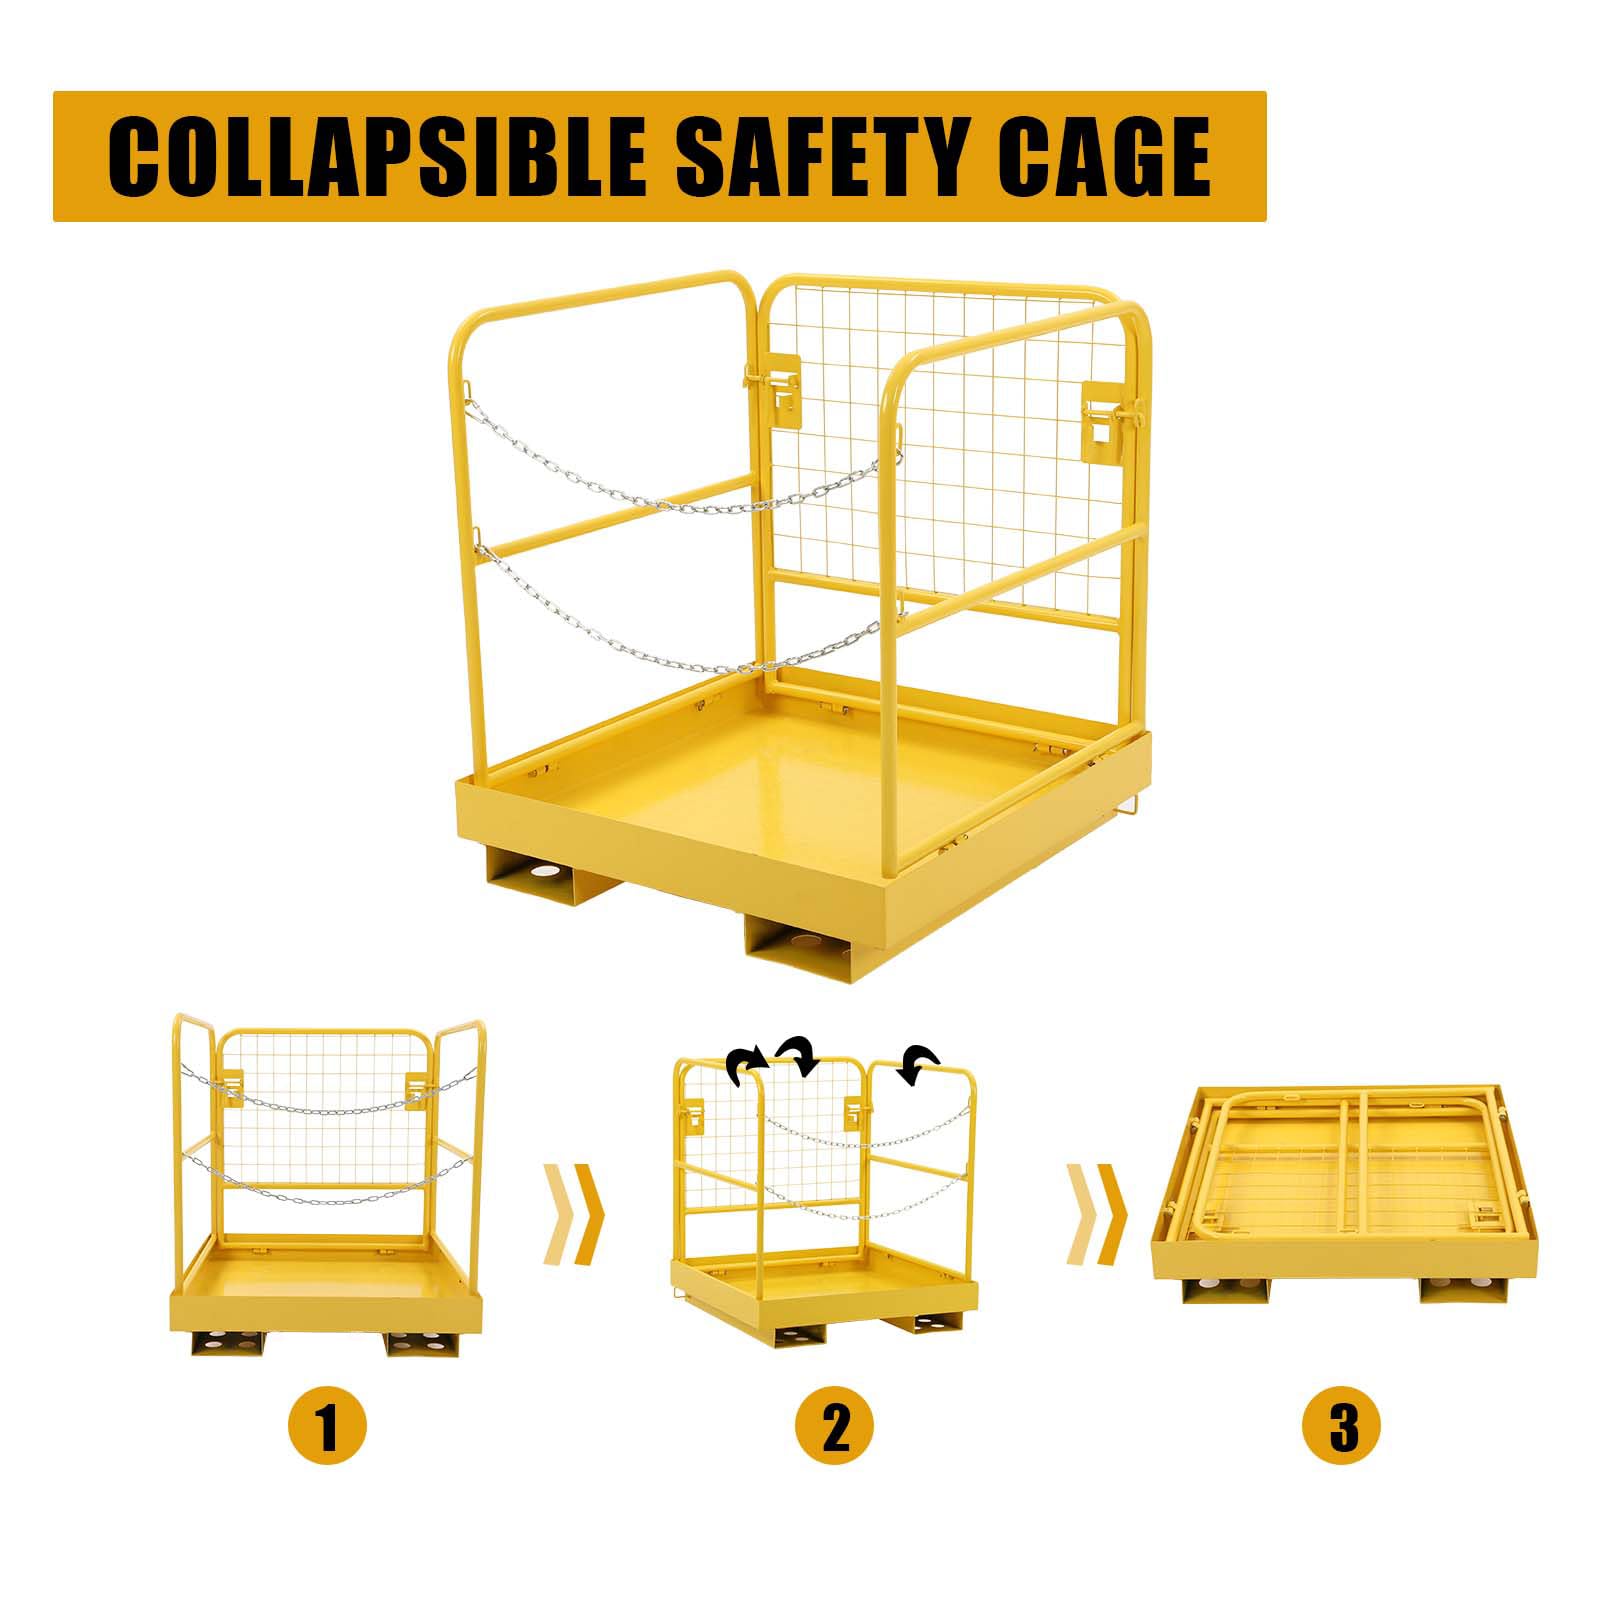 36" x 36" Forklift Safety Cage, 1200 LBS Capacity Forklift Work Platform, Aerial Platform Collapsible Lift Basket for Changing Lights, Painting, Roof Repair, Tree Service